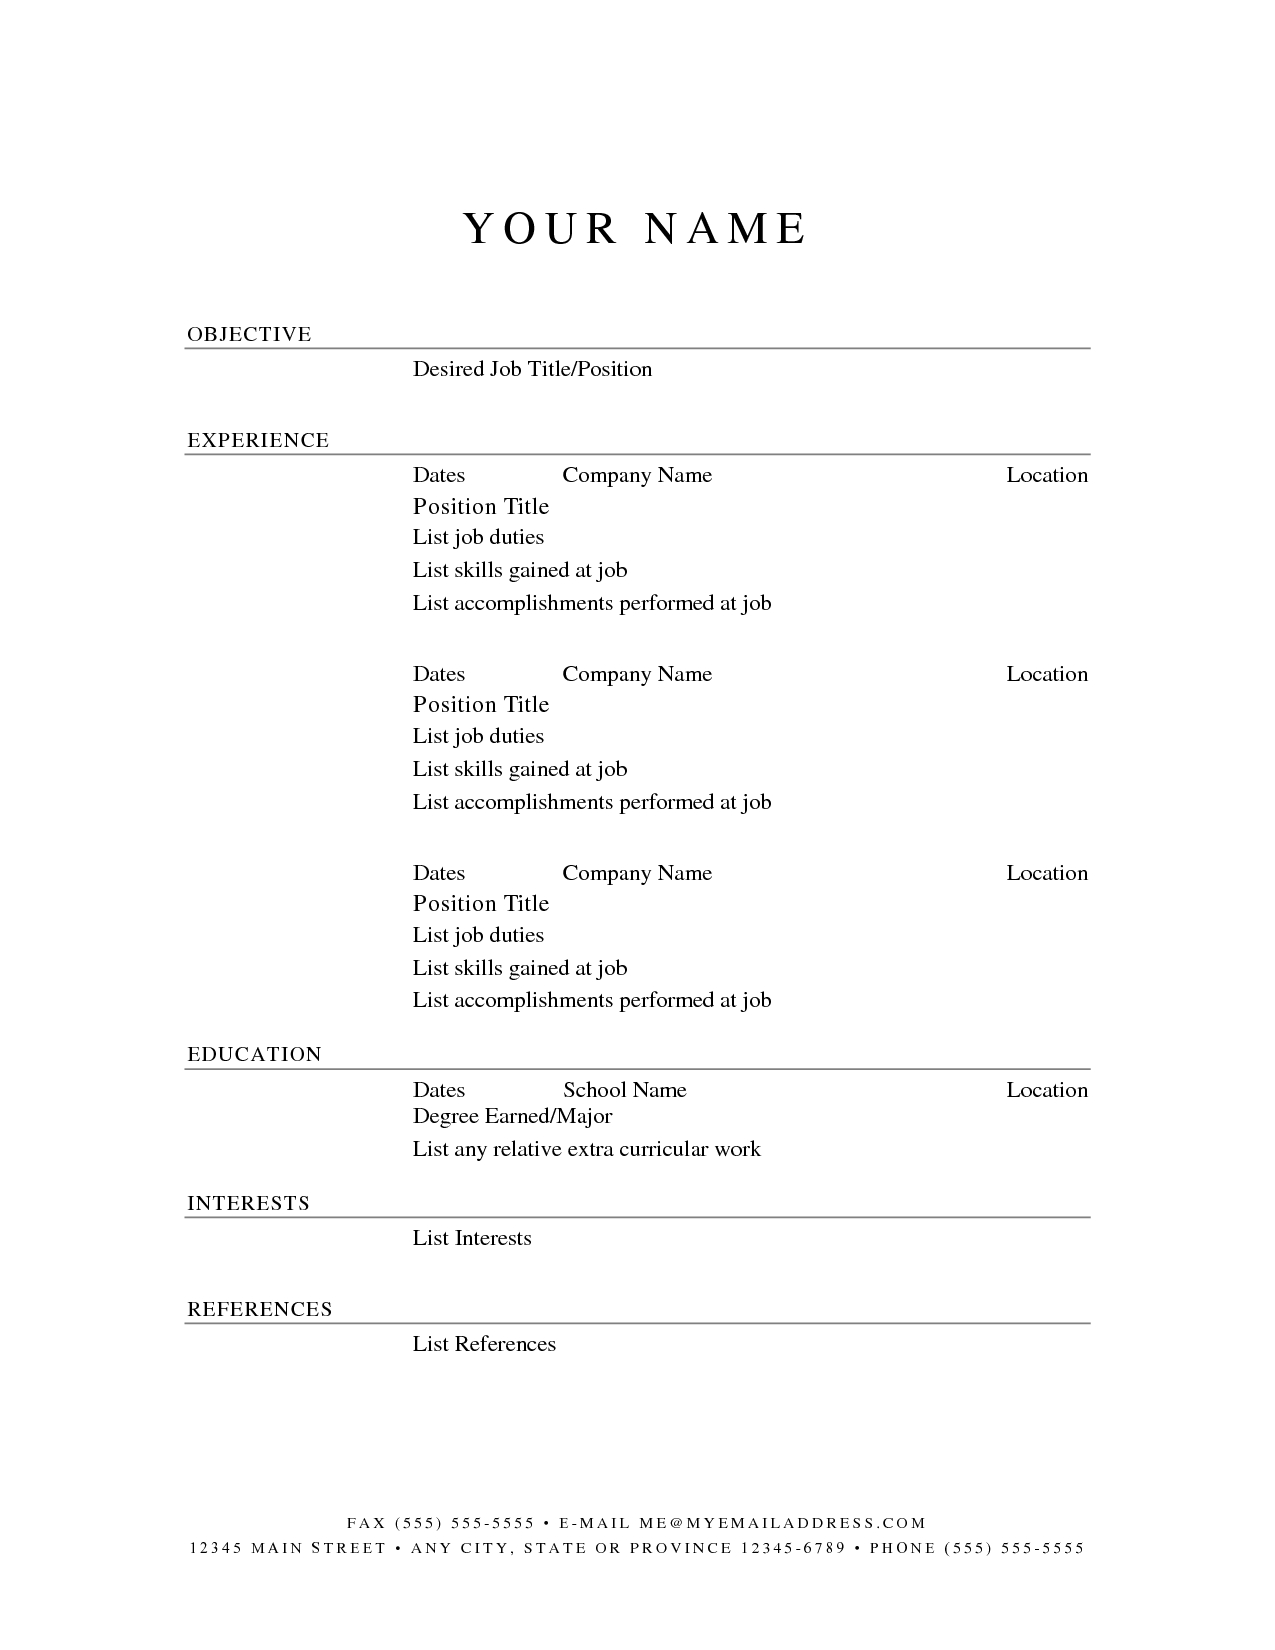 Free Resume Examples To Print - Horizonconsulting.co With Free Printable Resume Templates Microsoft Word